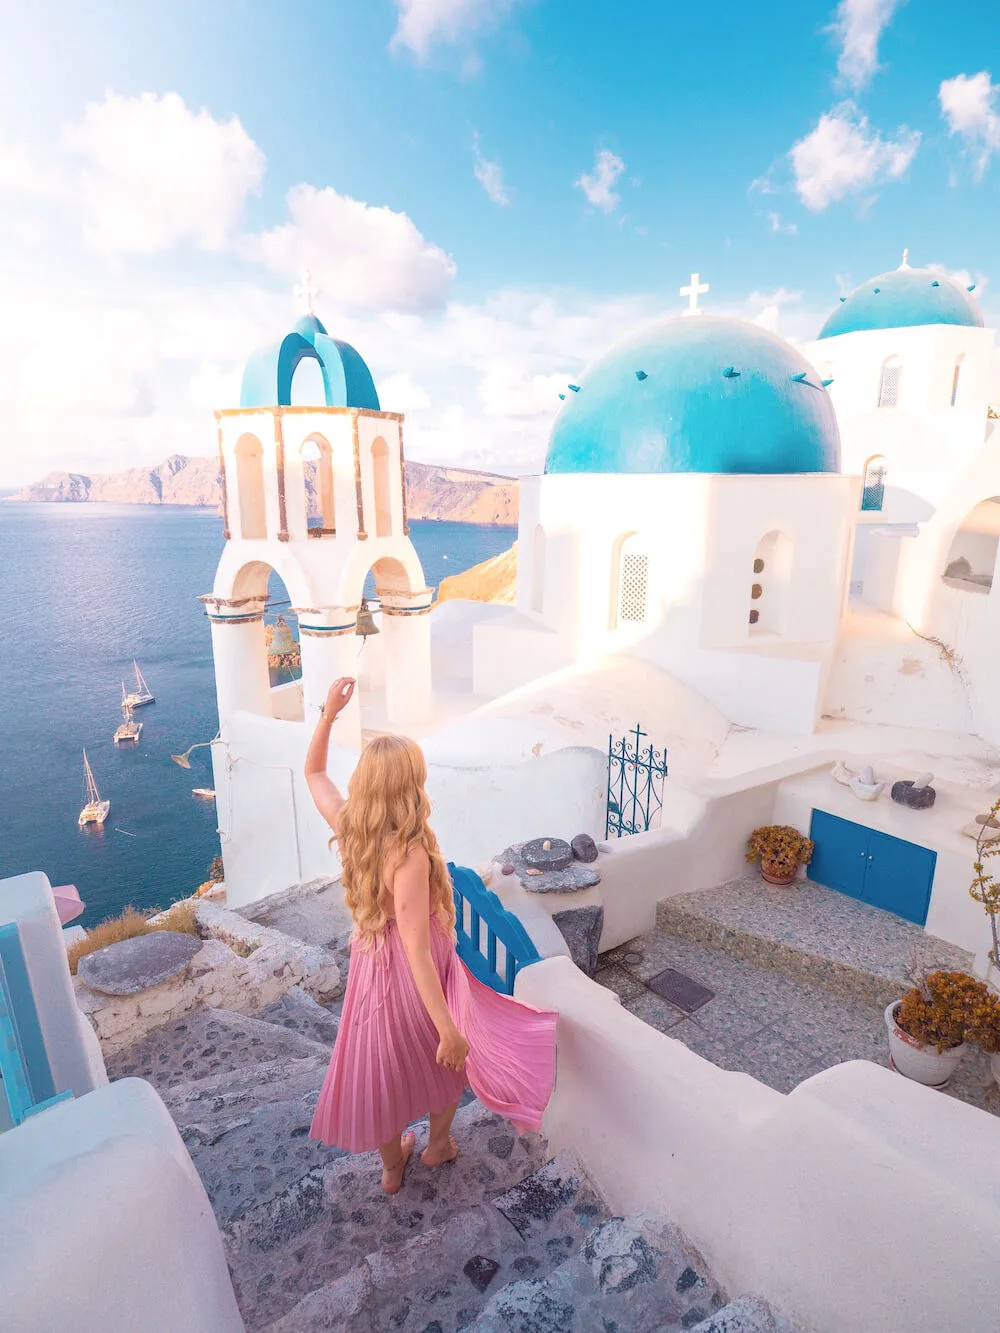 The best photo spots and most instagrammable places in Santorini: A complete photo guide. Click the photo to see the list of the best instagram photo spots in Santorini!